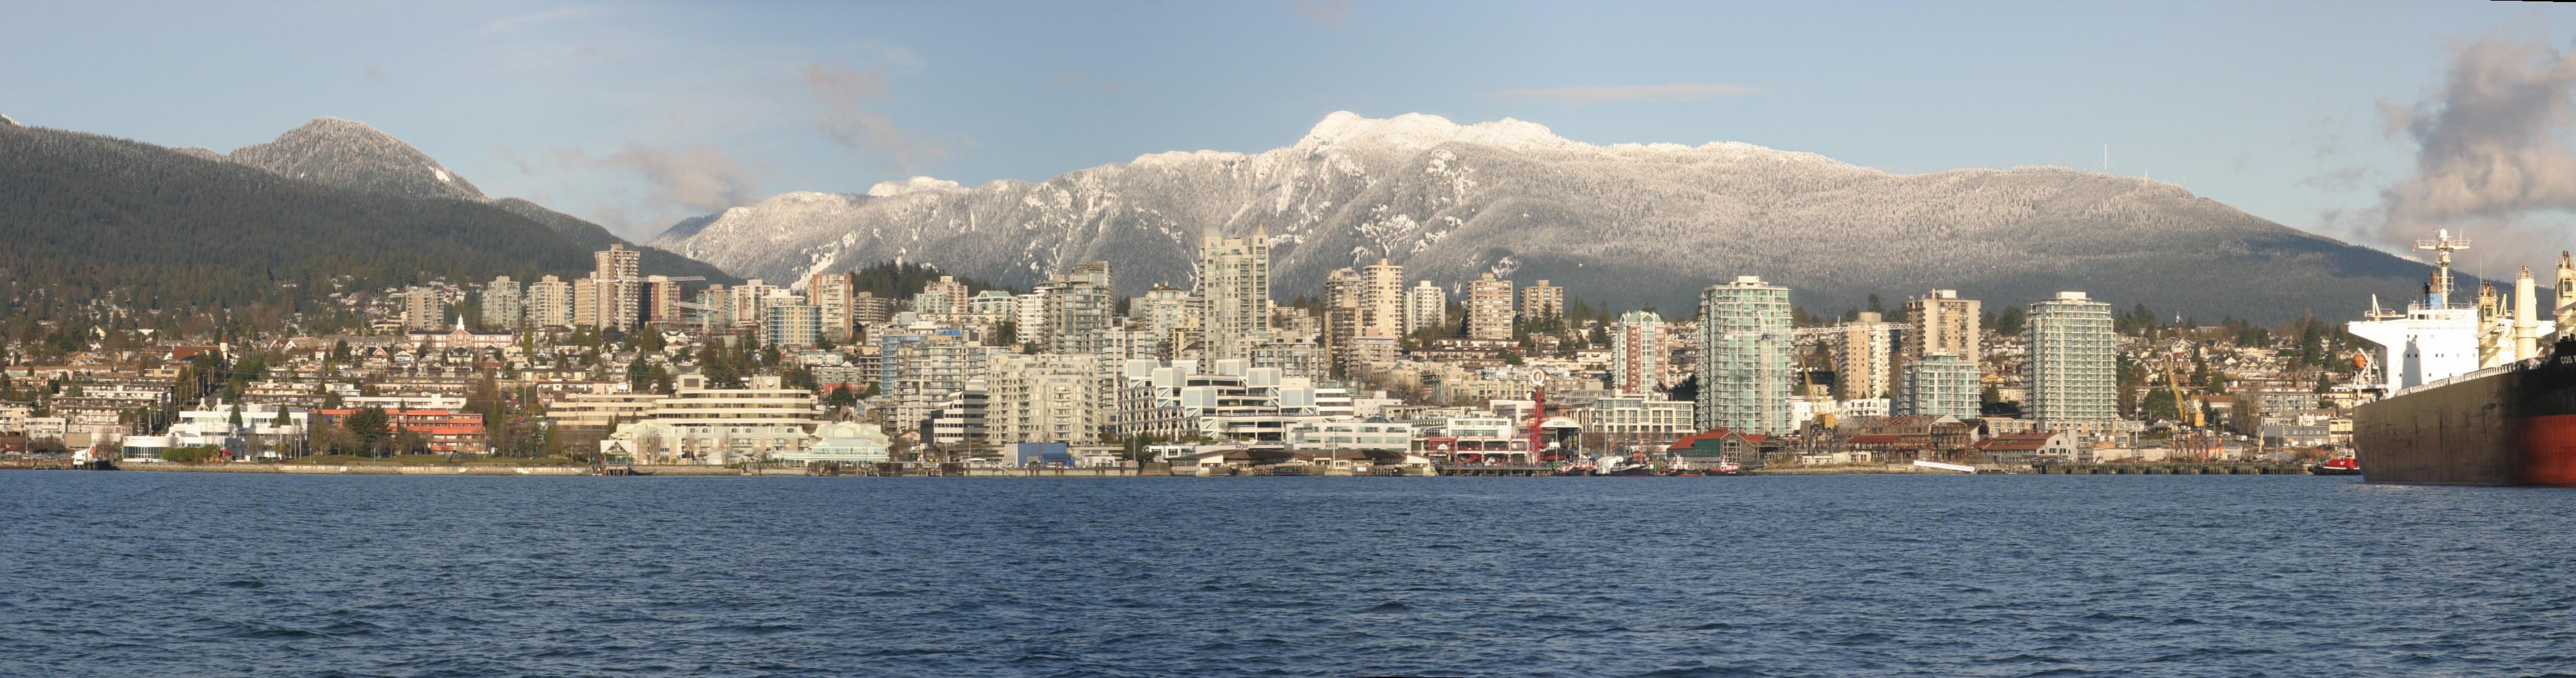 North Vancouver Wallpapers - Top Free North Vancouver Backgrounds ...